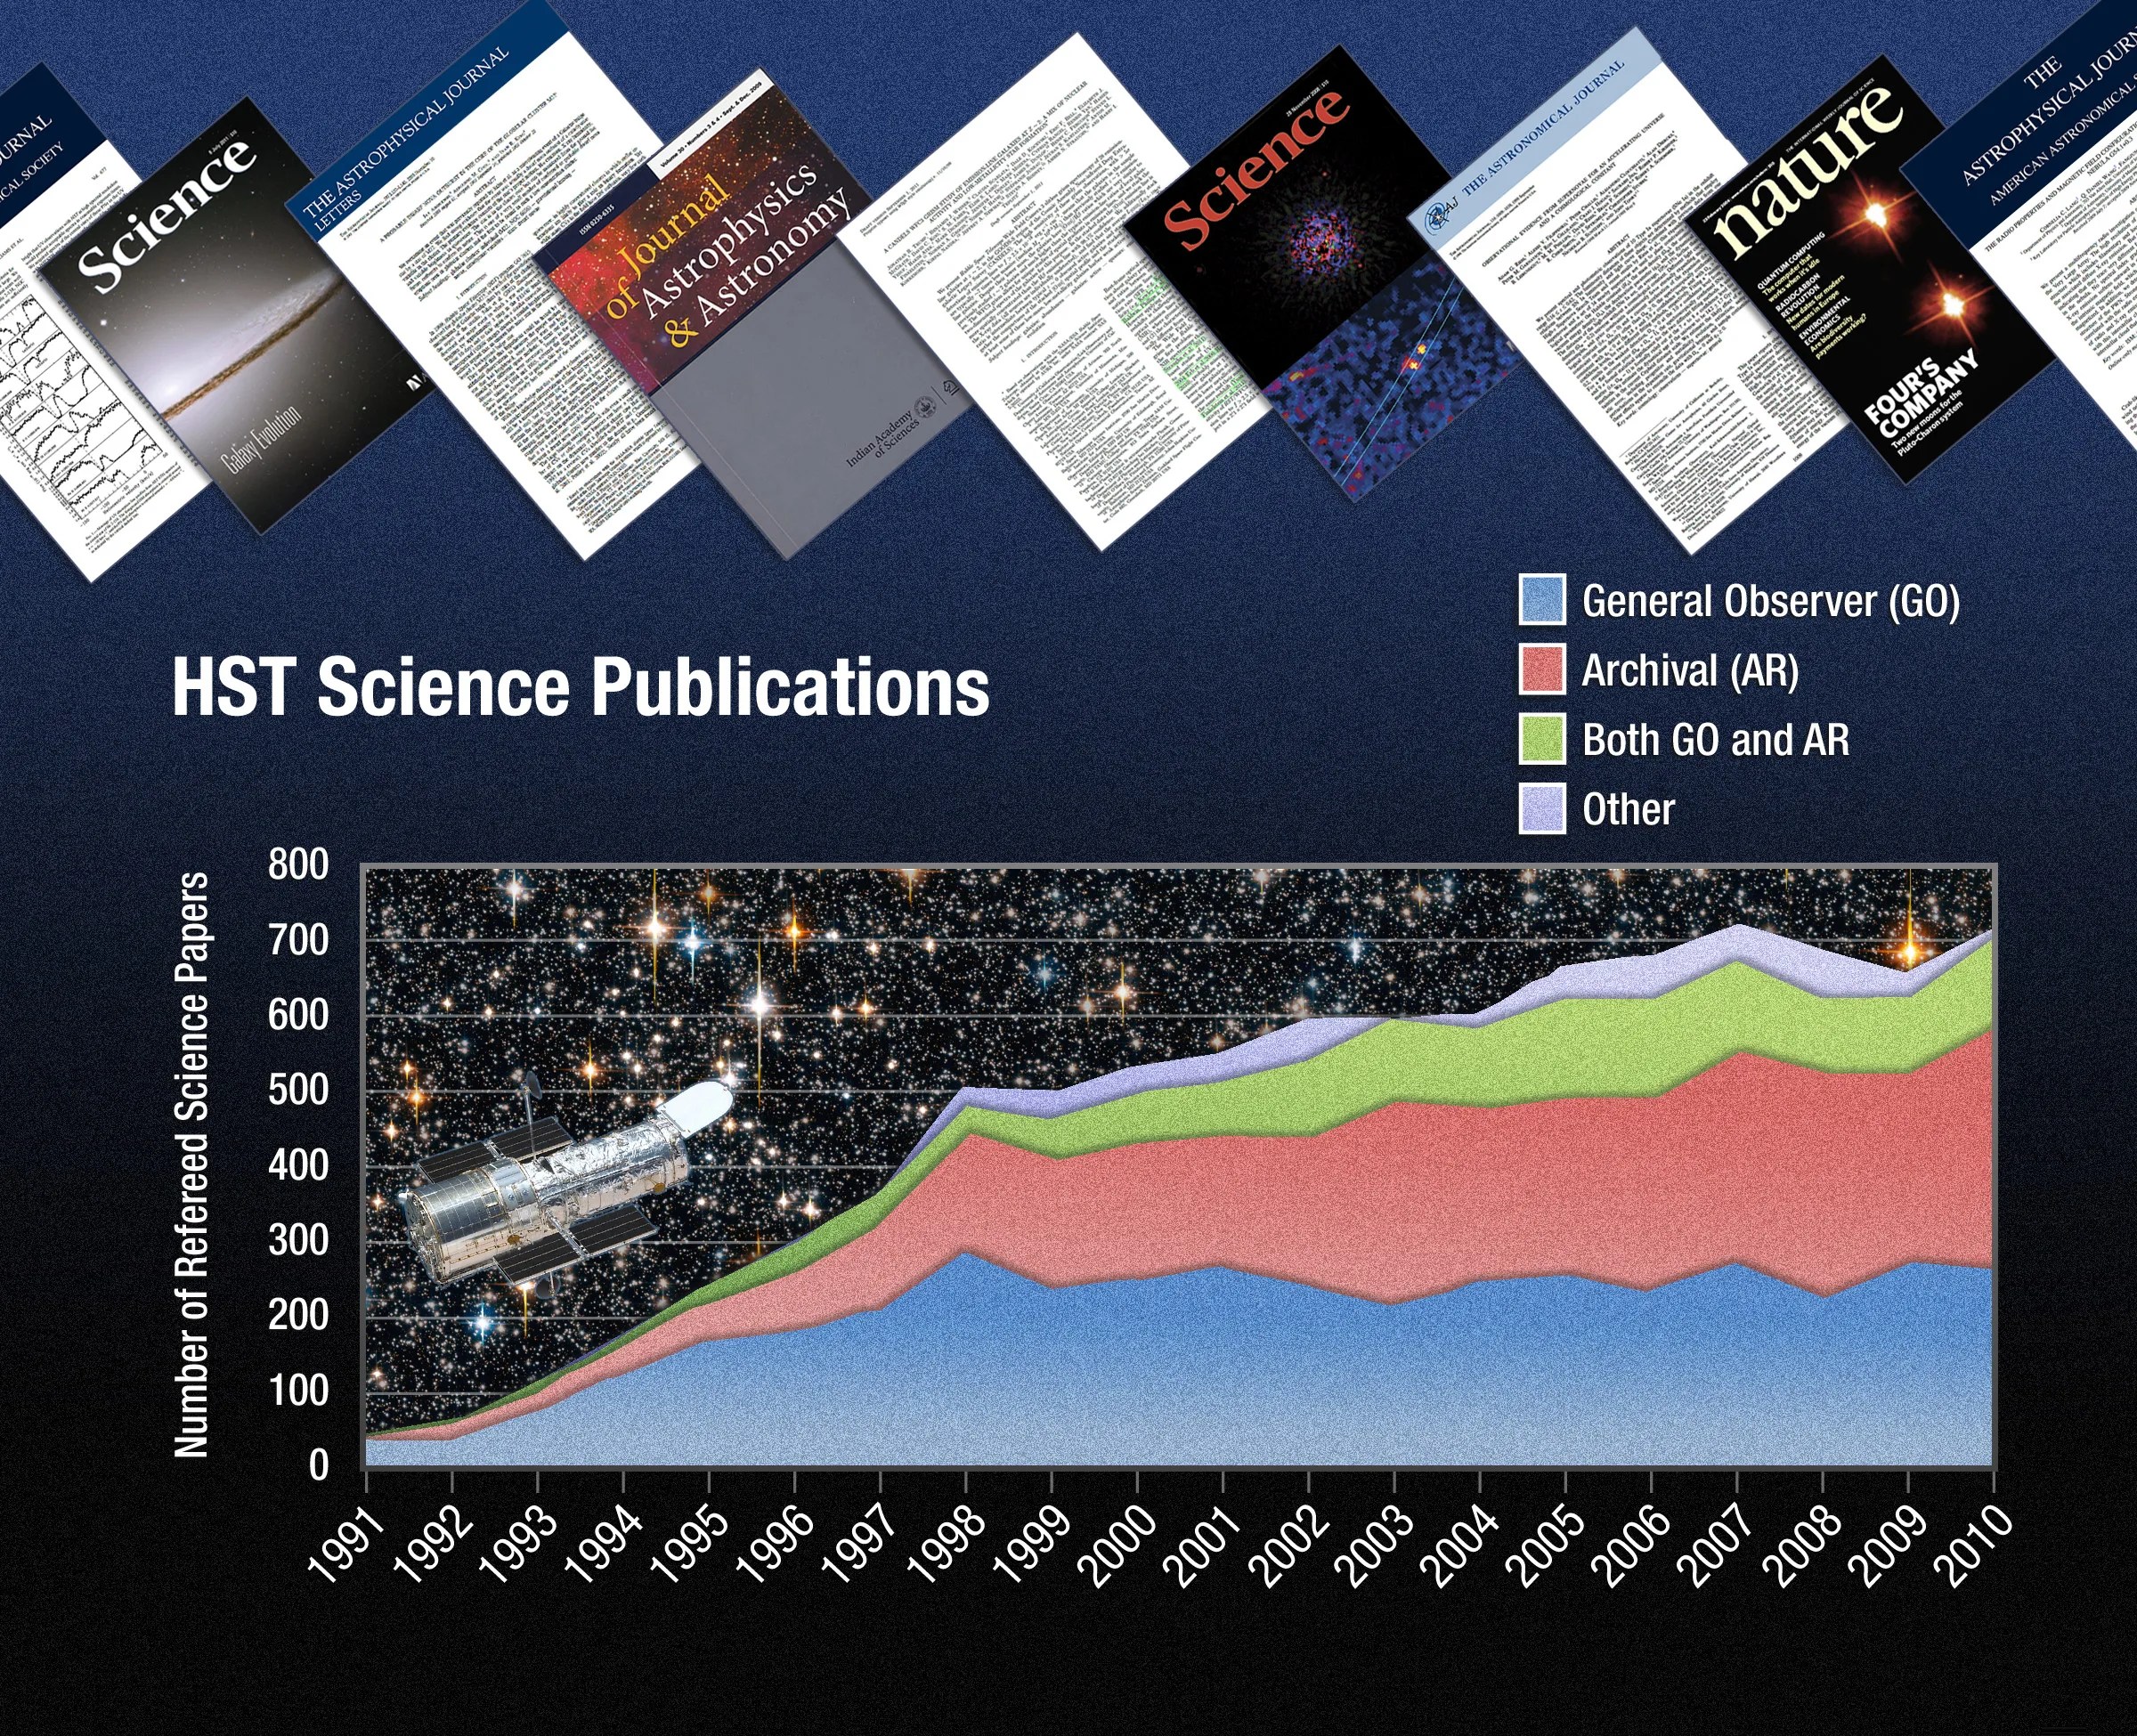 An illustration that holds a graph showing the growth of Hubble's scientific publications. The graph is color coded by publication type. Across the top of the image are covers of some of the scientific journals along with cover pages of some of the published papers.